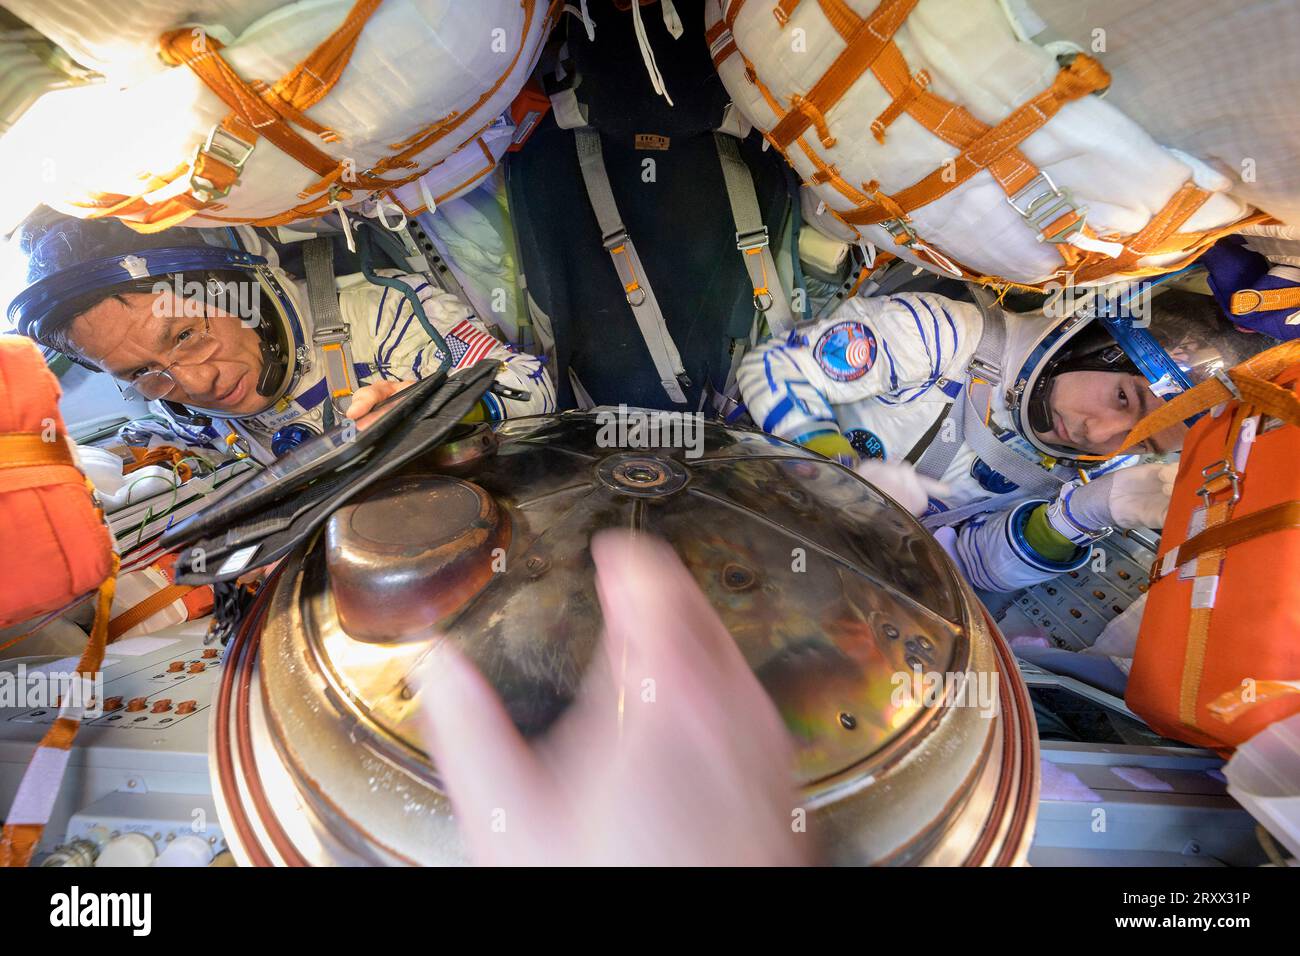 Zhezkazgan, Kazakhstan. 27 September, 2023. Expedition 69 NASA astronaut Frank Rubio, left, and Roscosmos cosmonaut Dmitri Petelin, right, inside the Russian Soyuz MS-23 spacecraft after the hatch is opened on landing, September 27, 2023 in Zhezkazgan, Kazakhstan. Roscosmos cosmonauts Sergey Prokopyev, Dmitri Petelin and NASA astronaut Frank Rubio returned after 371 days aboard the International Space Station.  Credit: Bill Ingalls/NASA/Alamy Live News Stock Photo